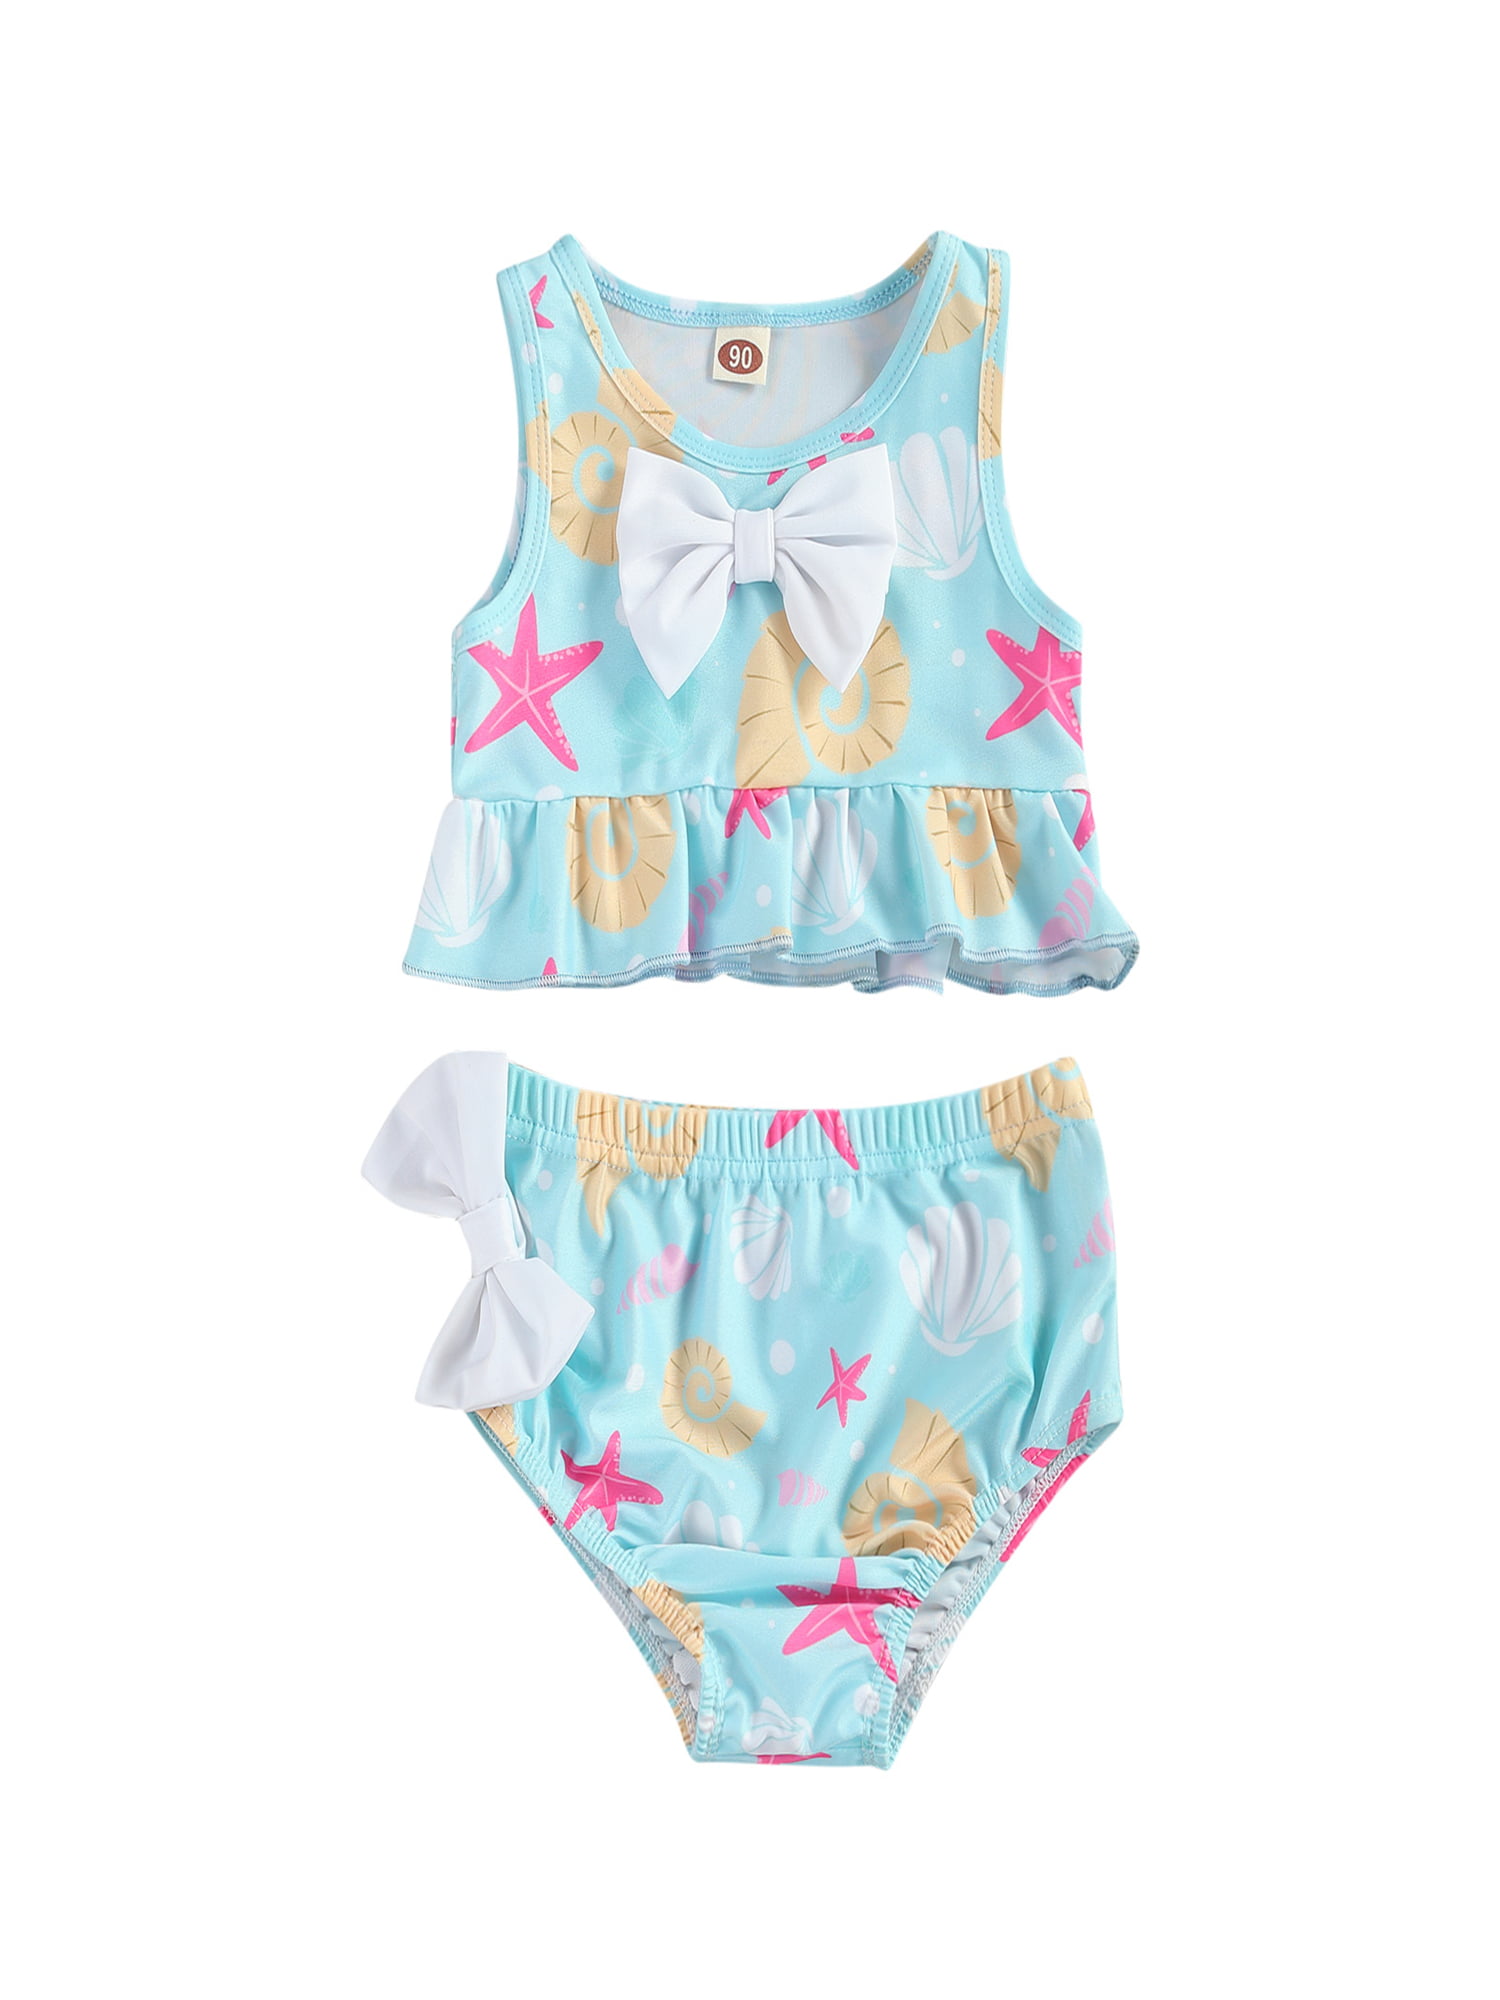 Carolilly Baby Girls One Piece Bathing Suit Flamingo Print Blue Striped Swimwear with Flying Shoulder and Fringes Multicolor from 12months-7years Children